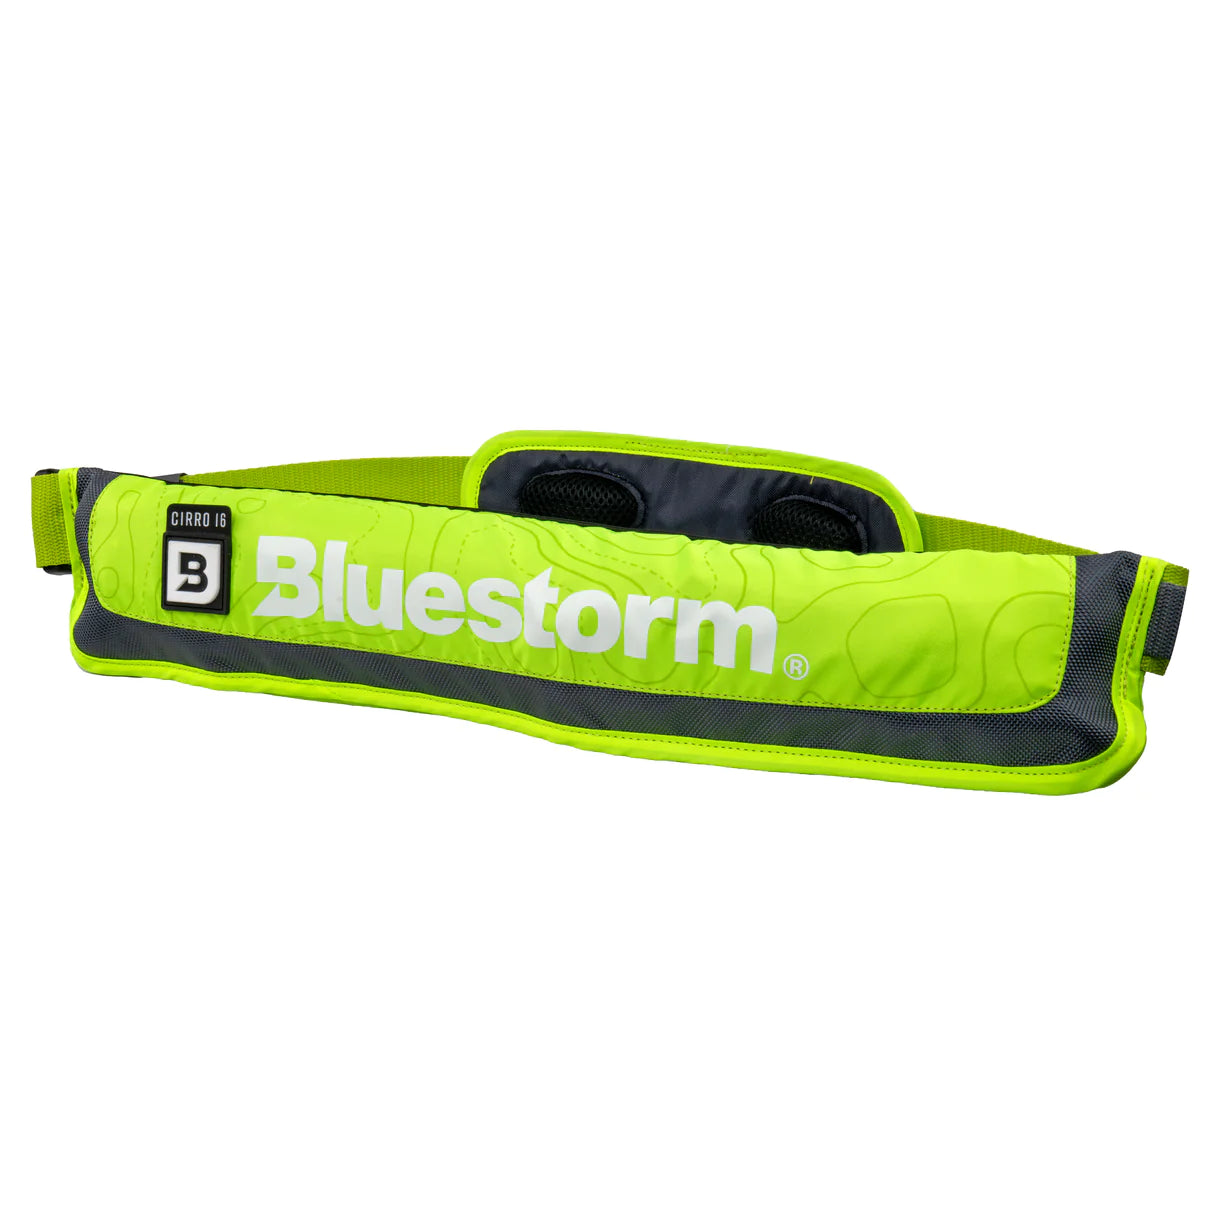 Bluestorm Cirro 16 Manual Inflatable Life Jacket - USCG Approved – Mad Dog  Products